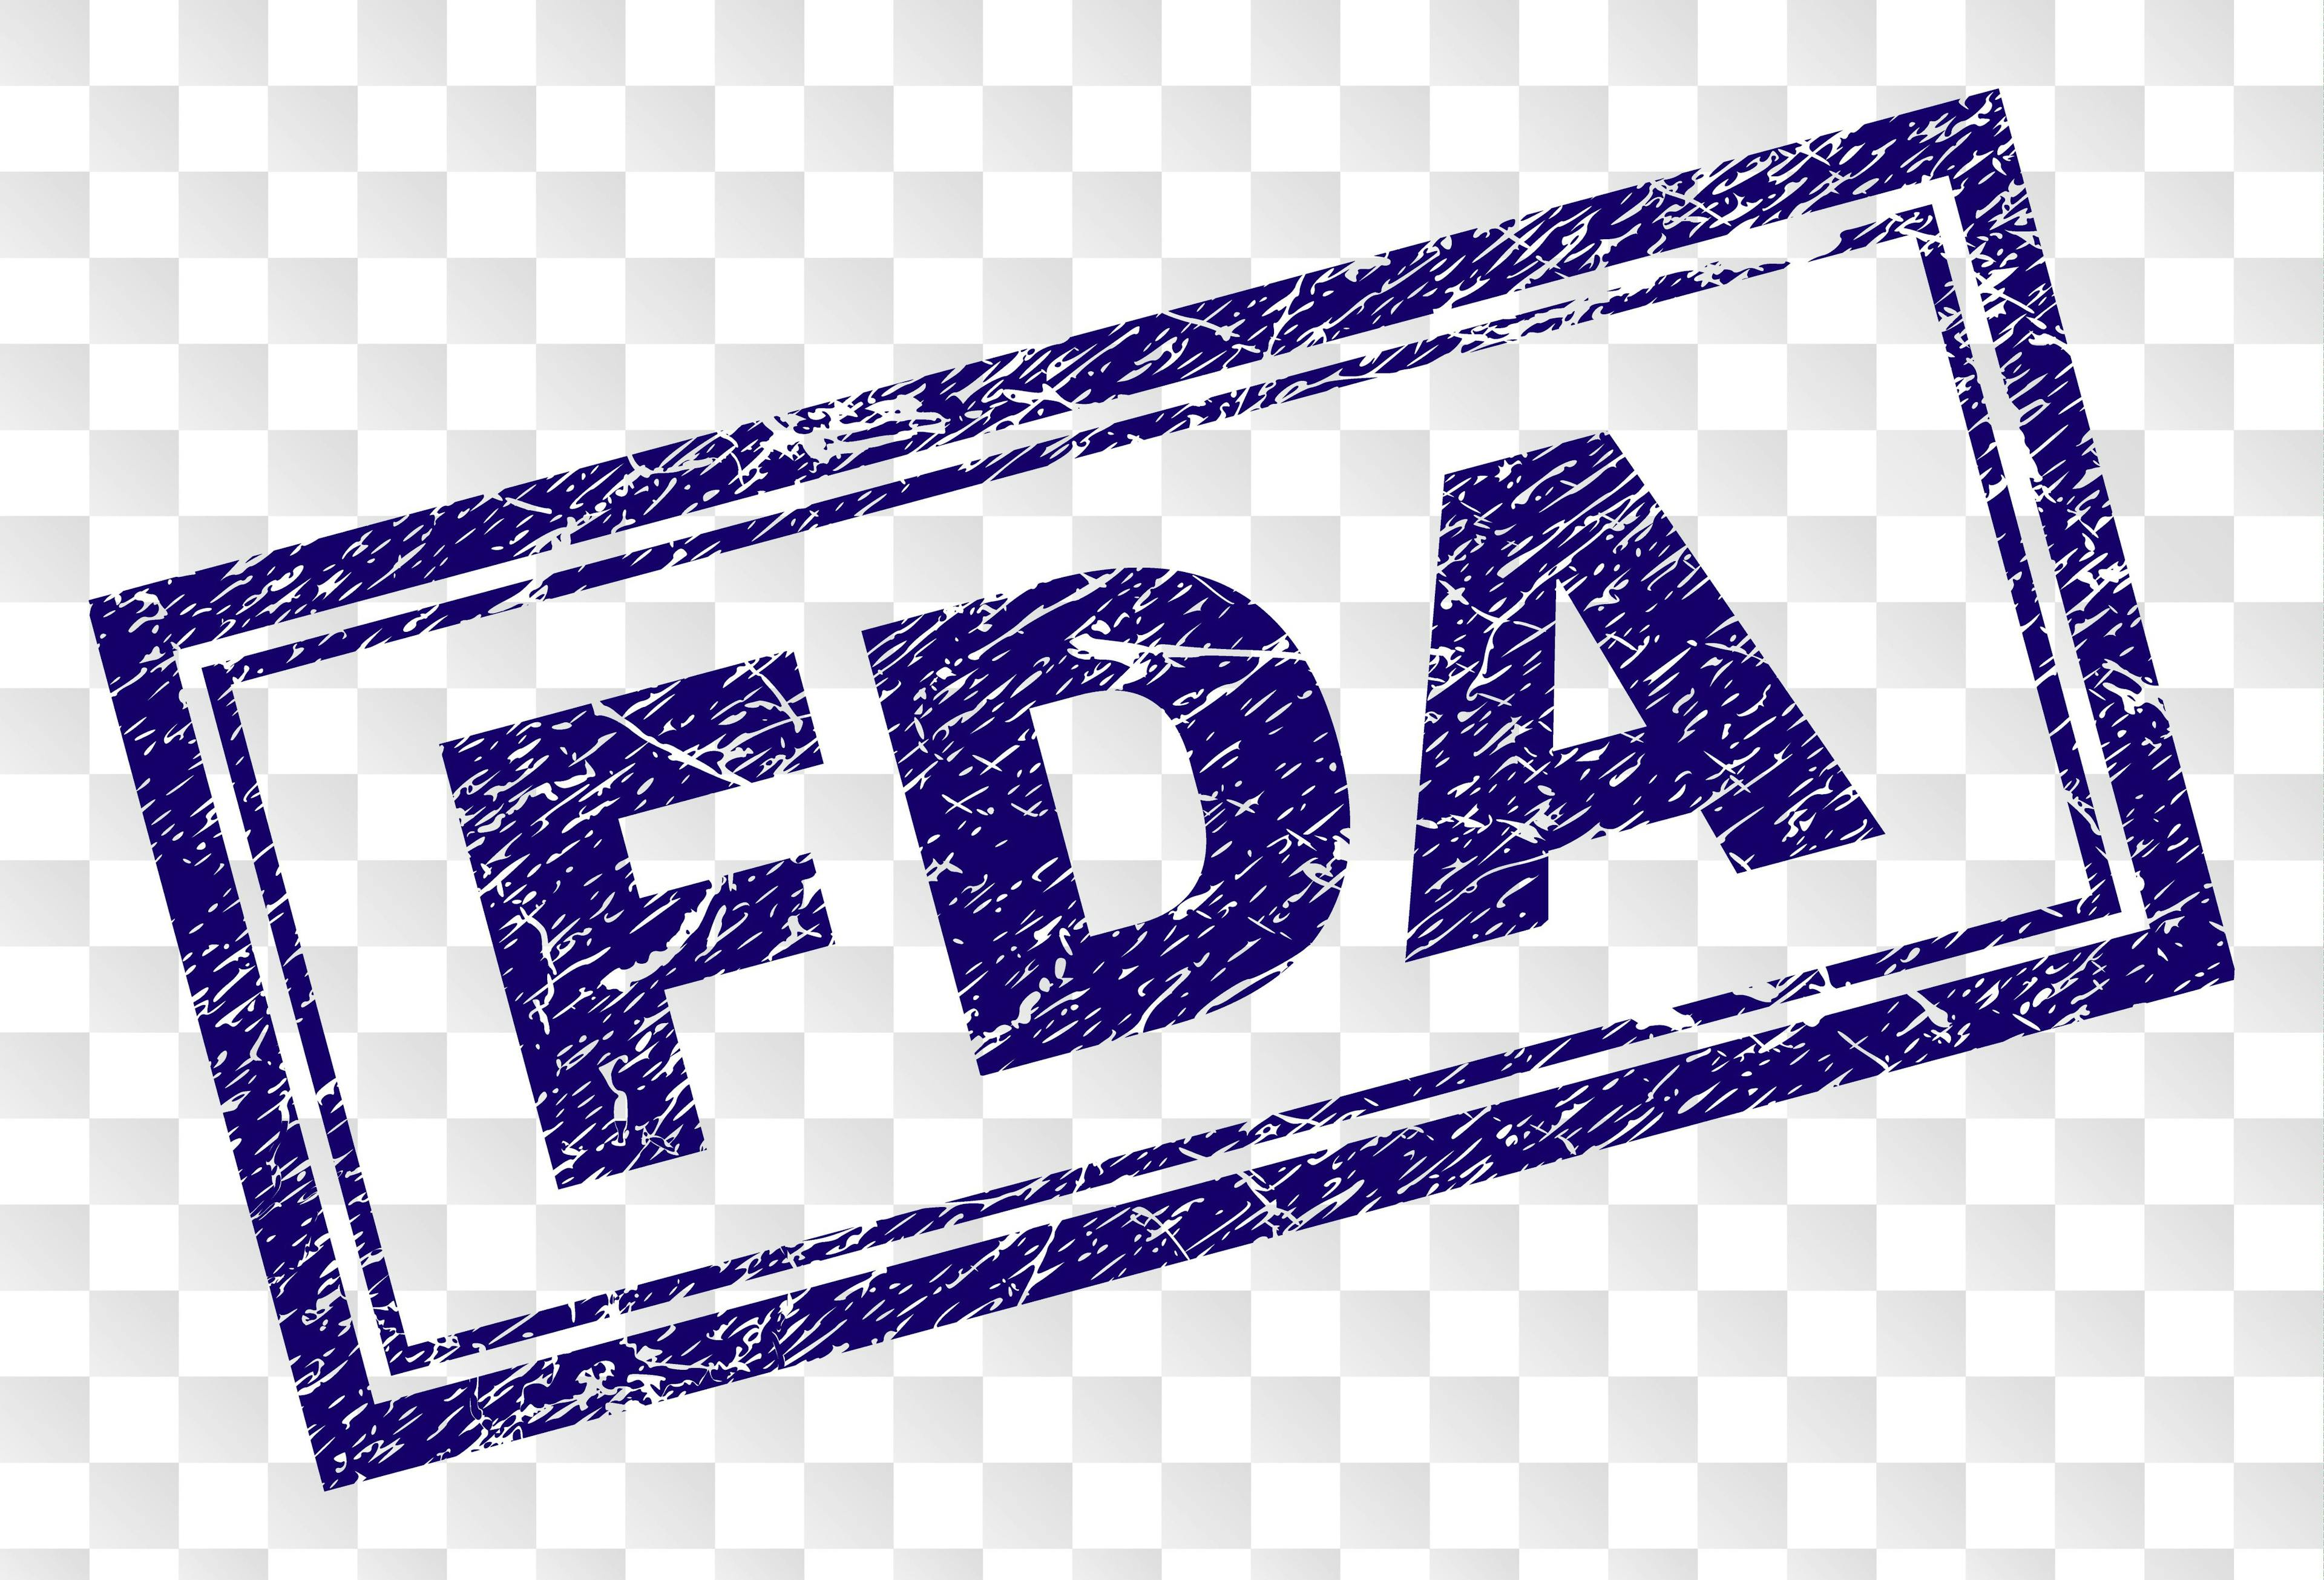 POLL: Which Recent FDA Update Was Most Exciting?